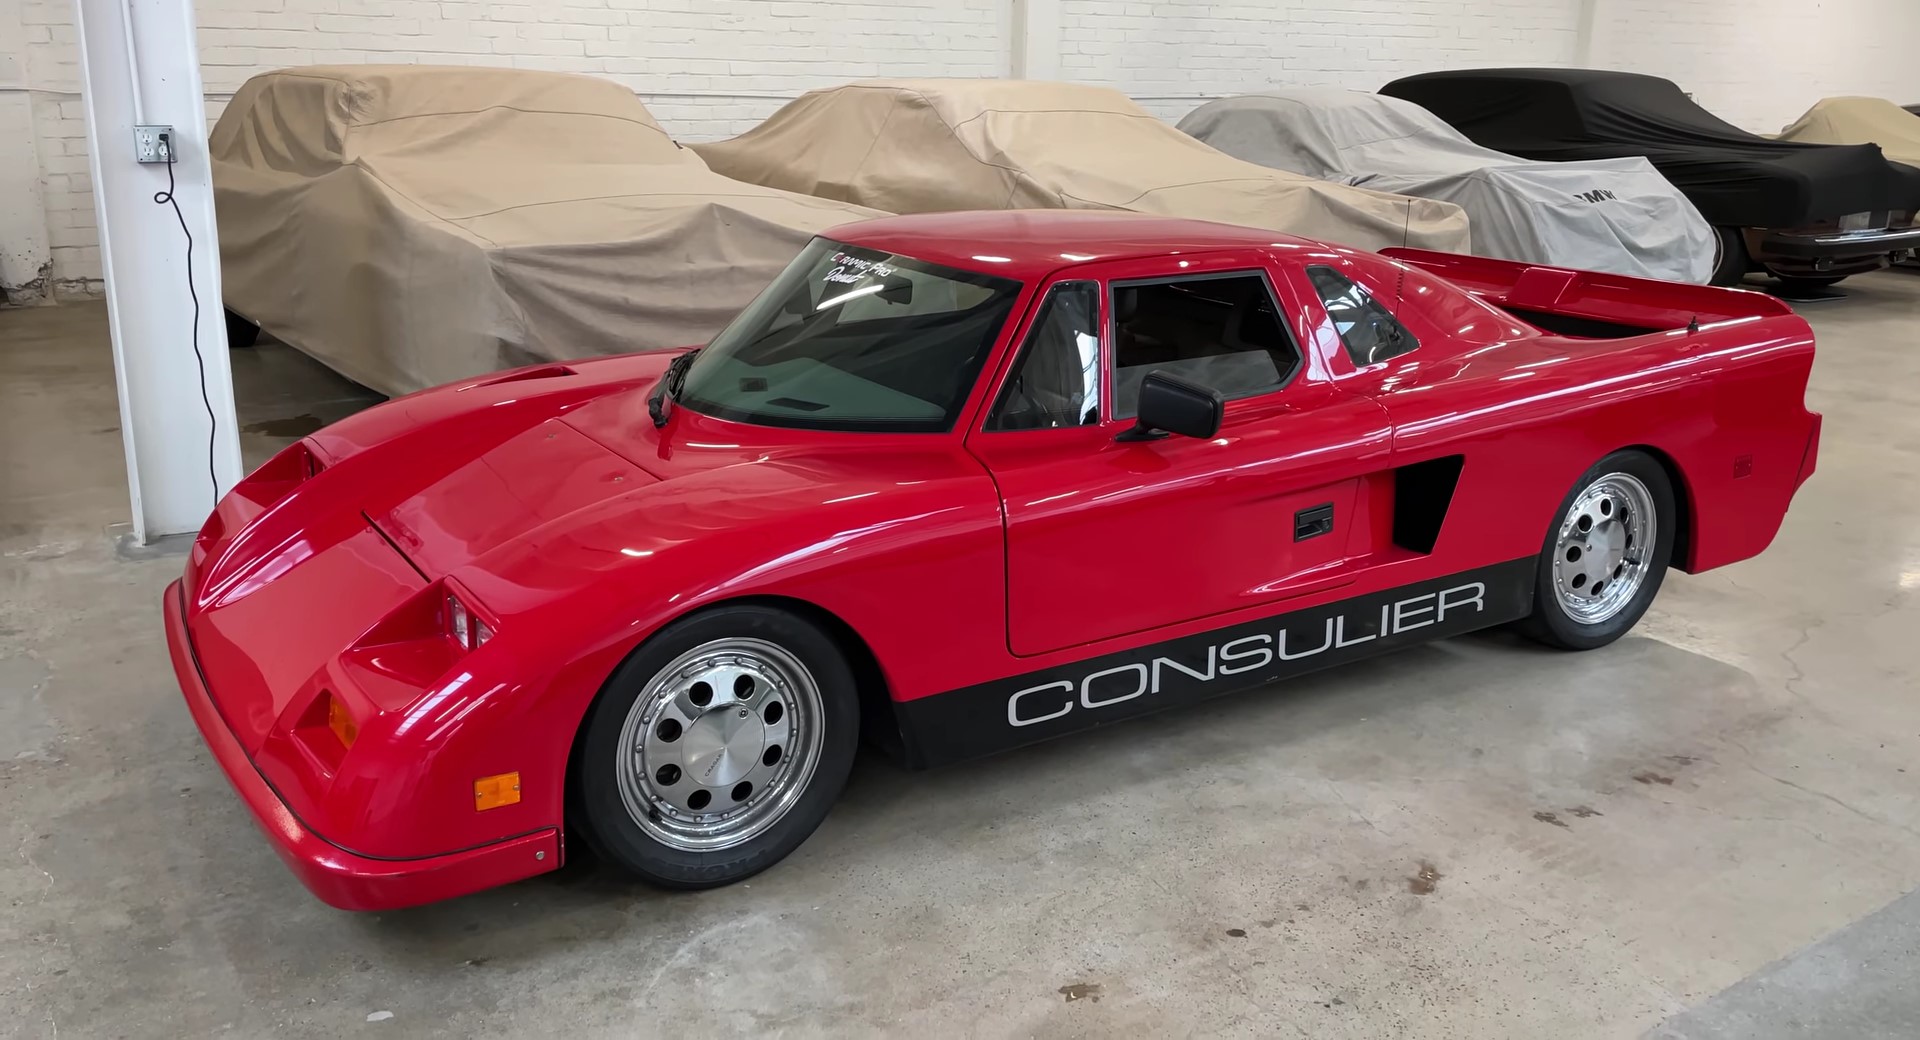 The Mosler Consulier GTP Wanted To Take On Countachs And Testarossas With A 175 HP Dodge Omni Four Auto Recent